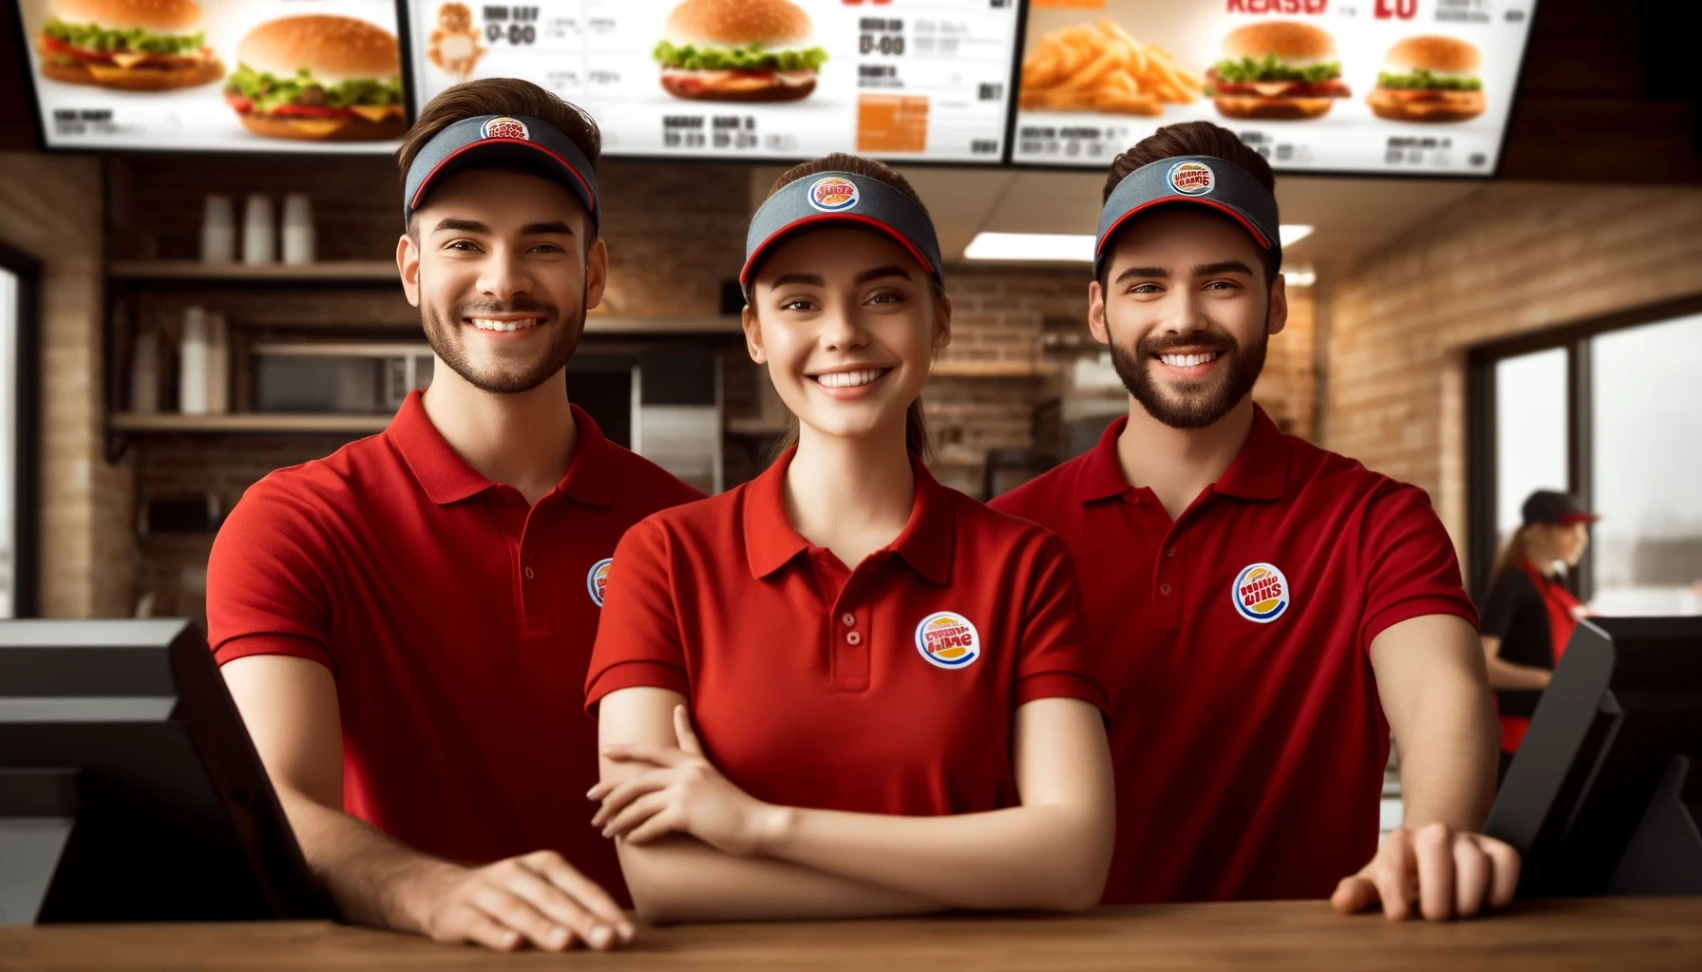 Burger King - How to Apply for Positions